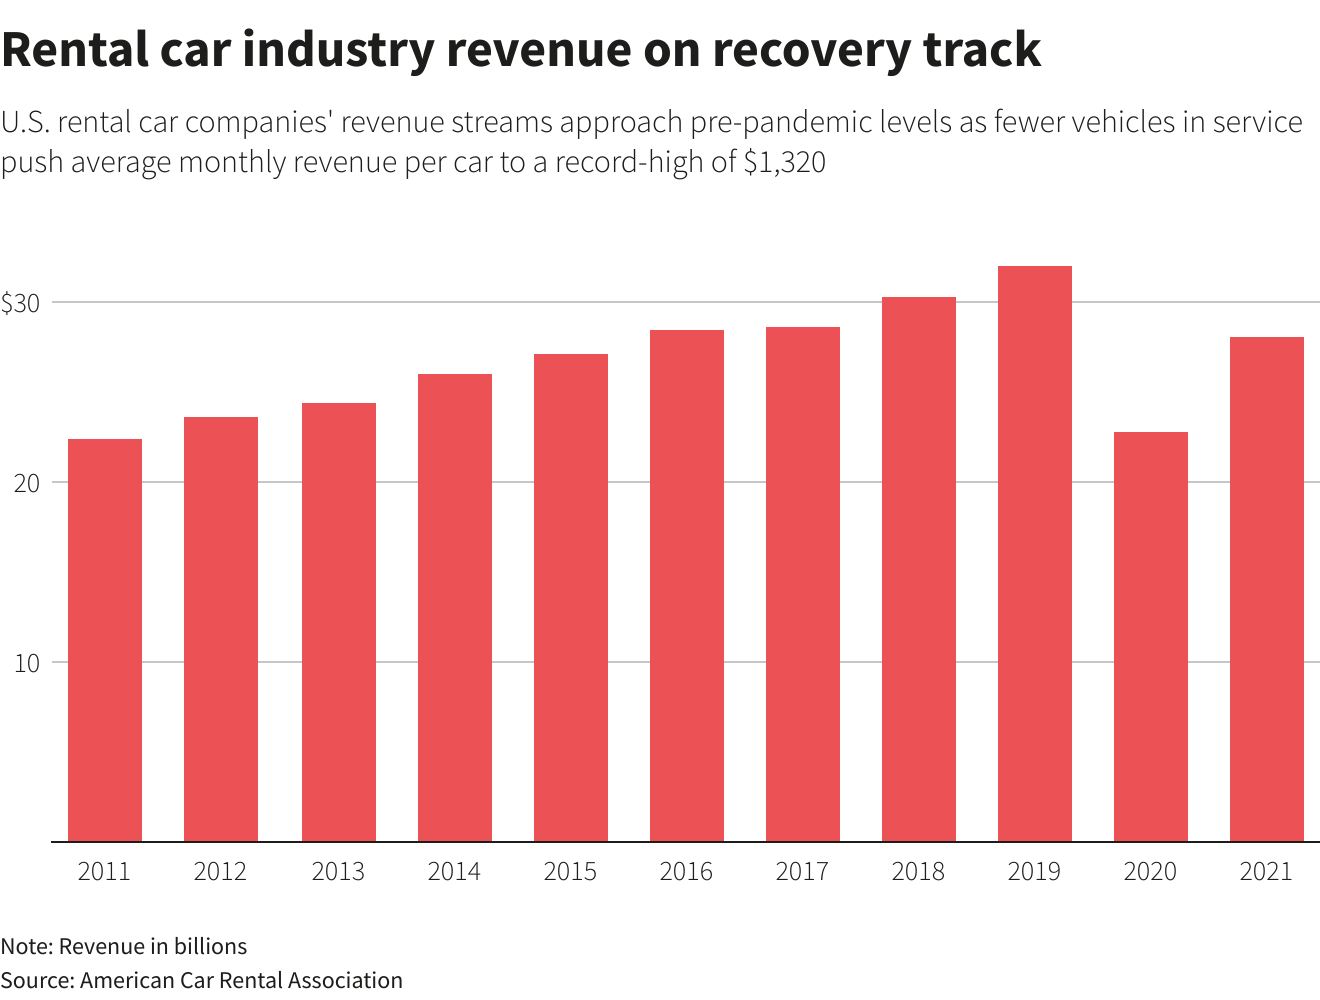 Rental car industry revenue on recovery track